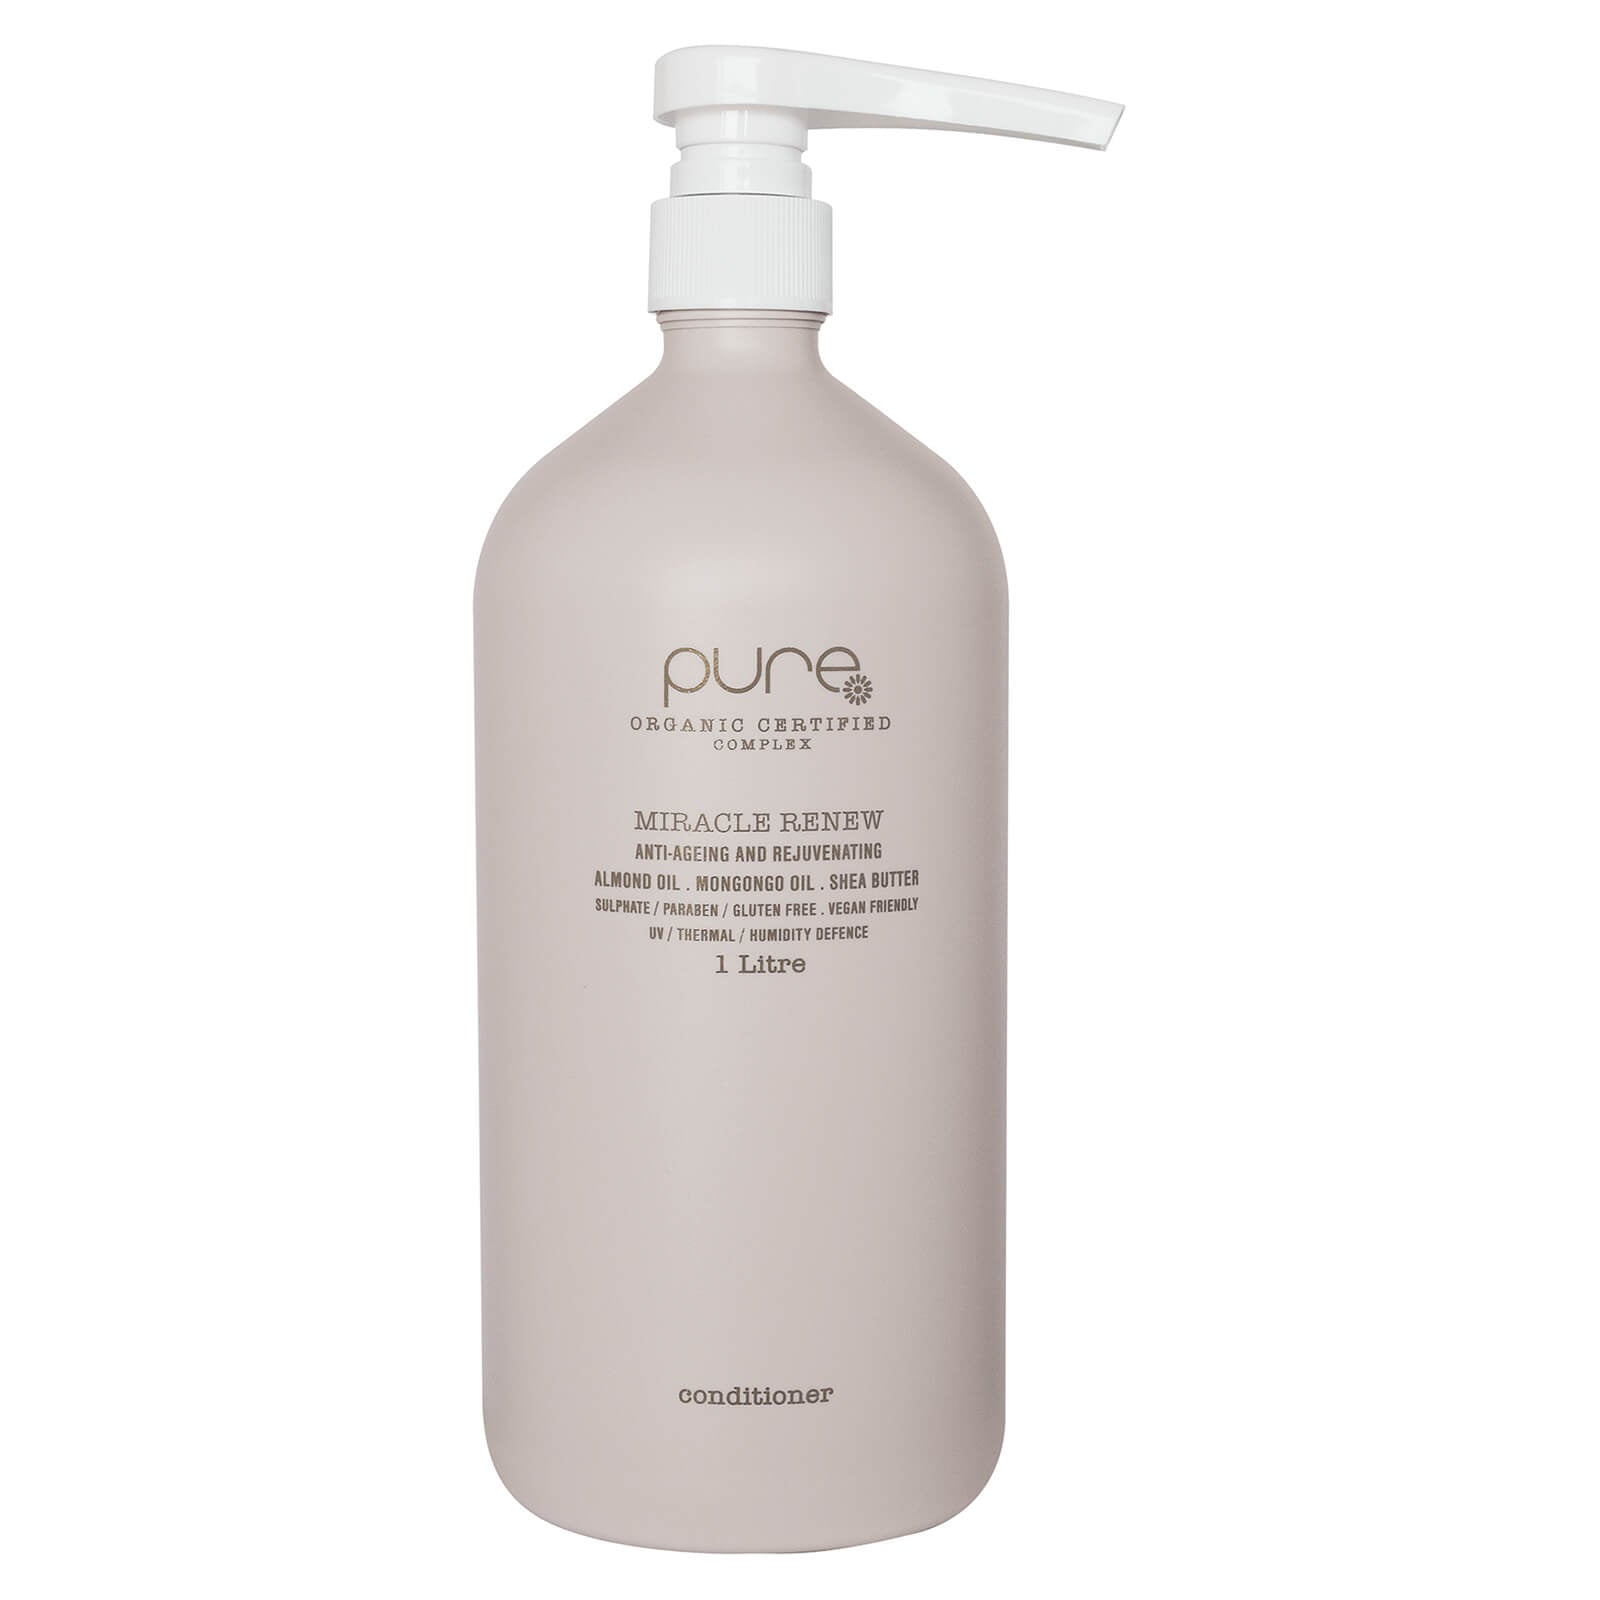 PURE MIRACLE RENEW CONDITIONER 1LT